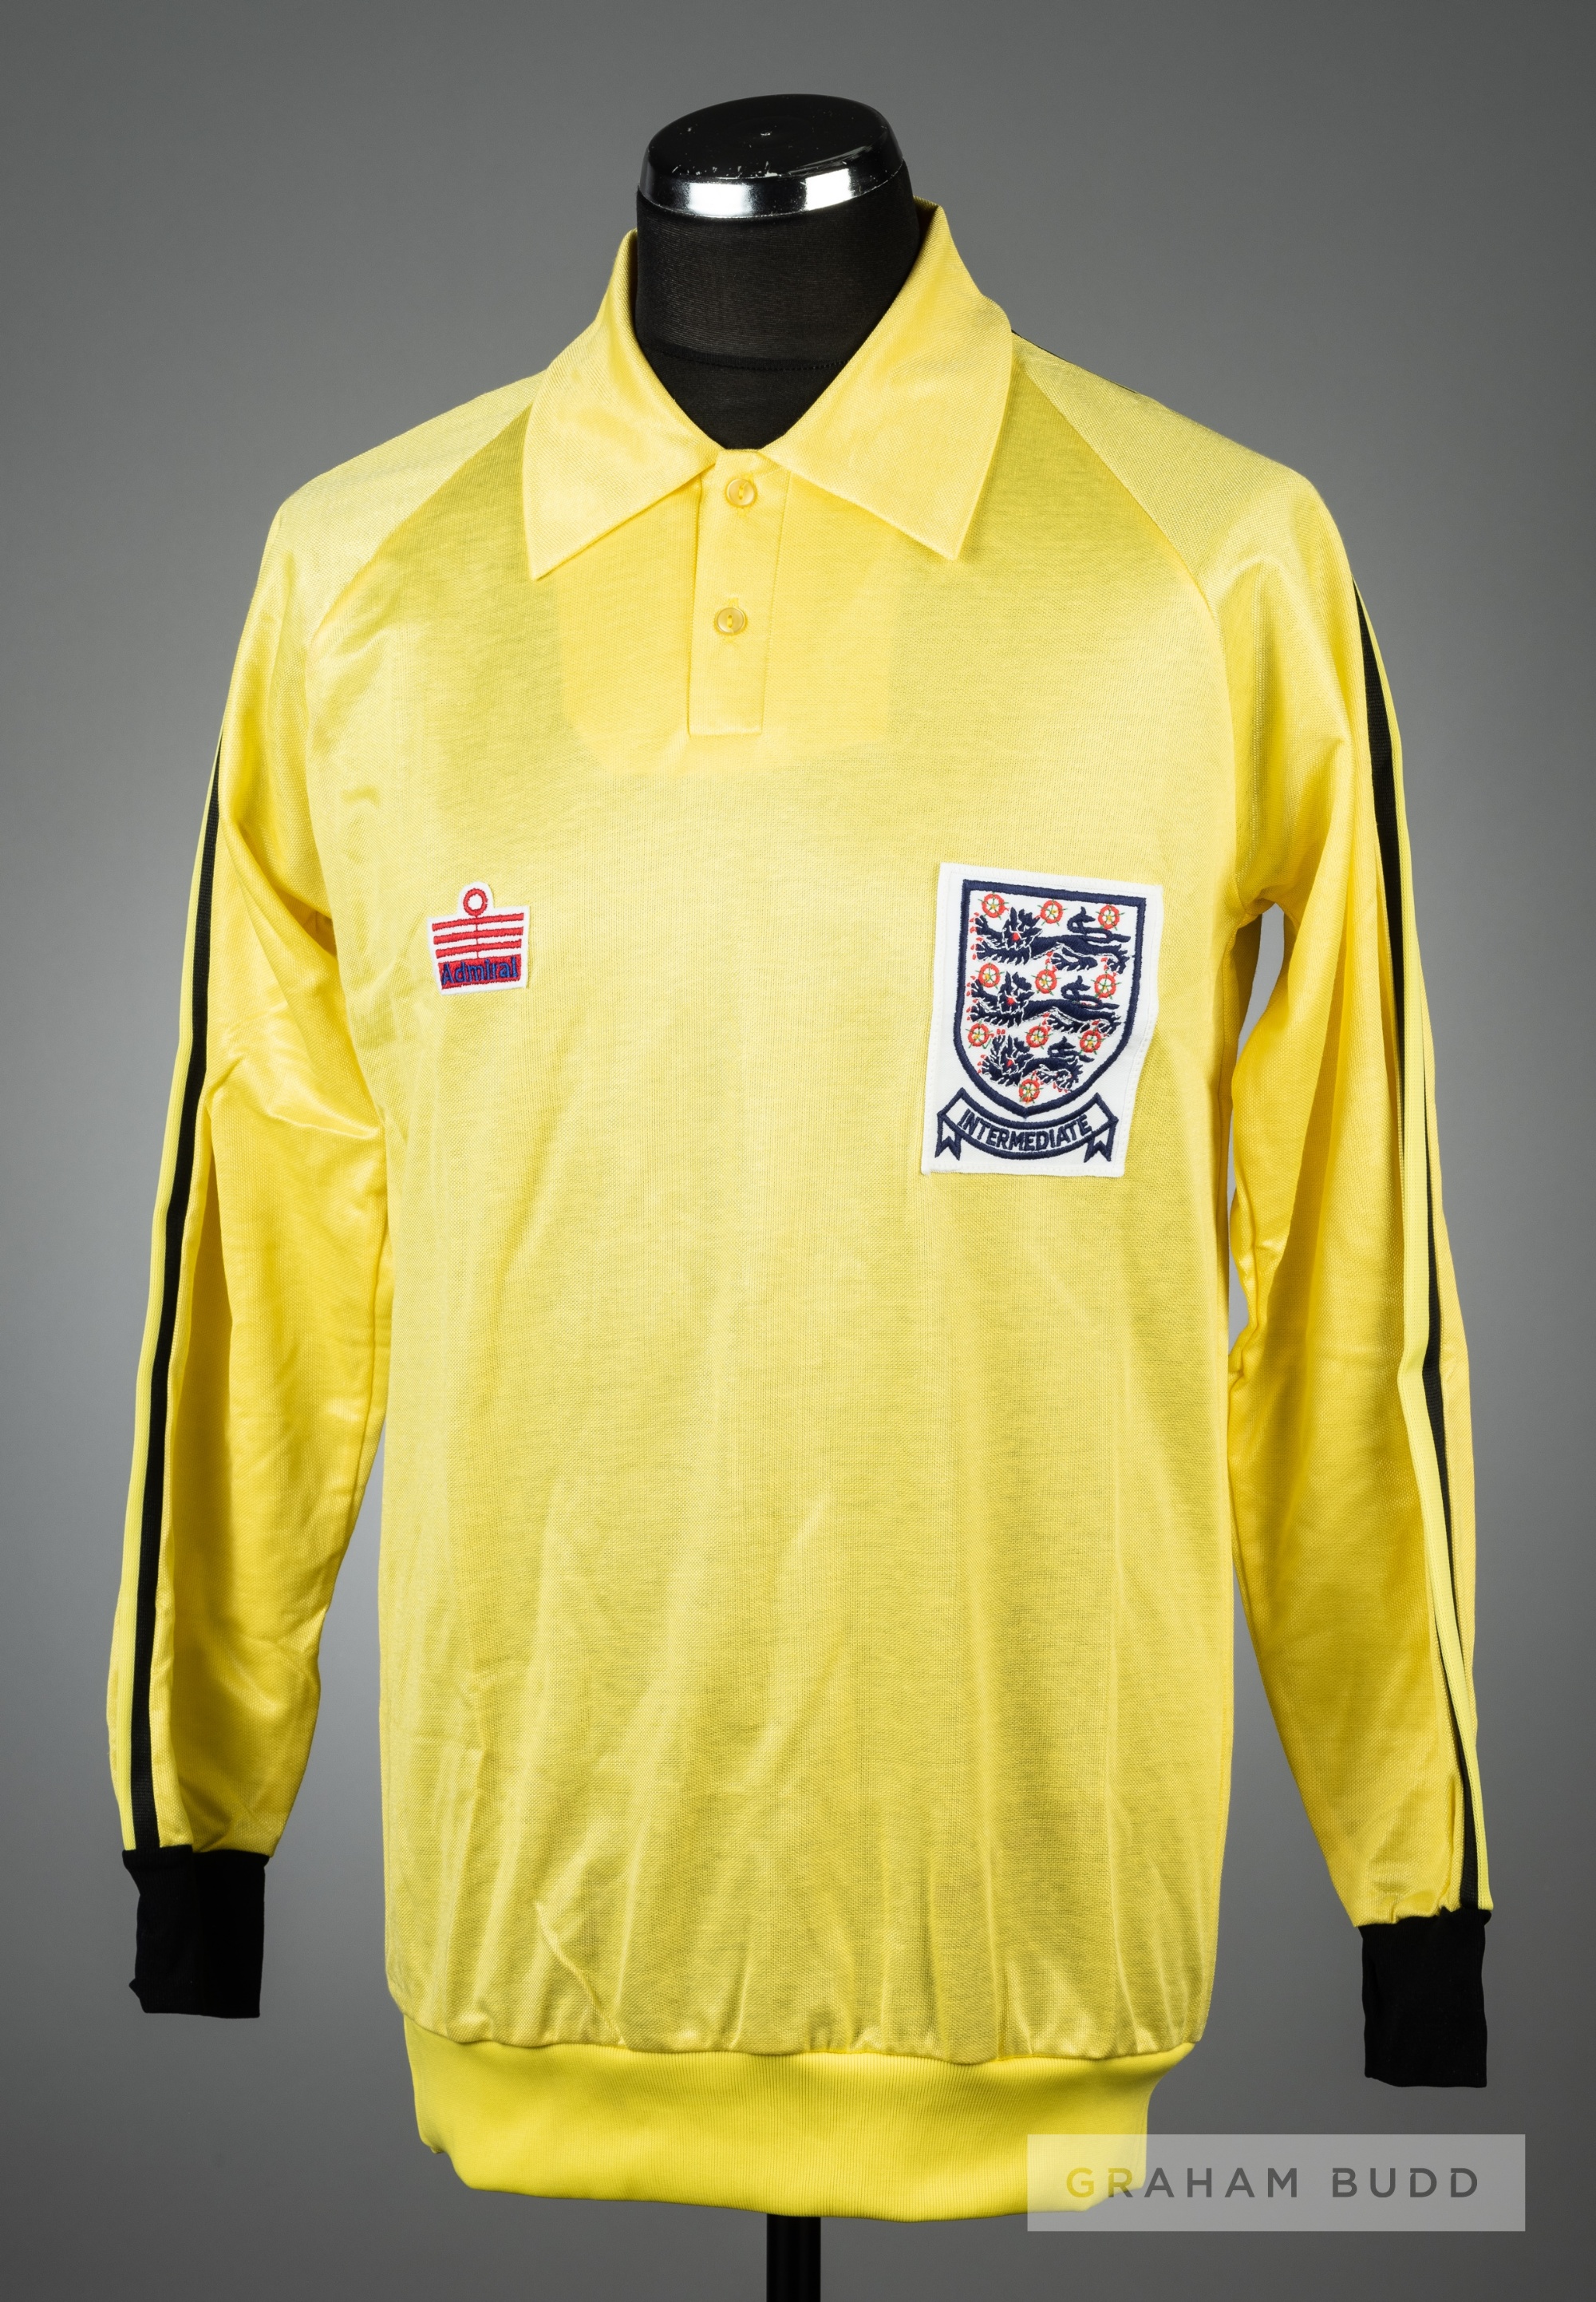 John Lukic yellow England No.1 intermediate goalkeeping jersey dating from 1981, by Admiral, long-